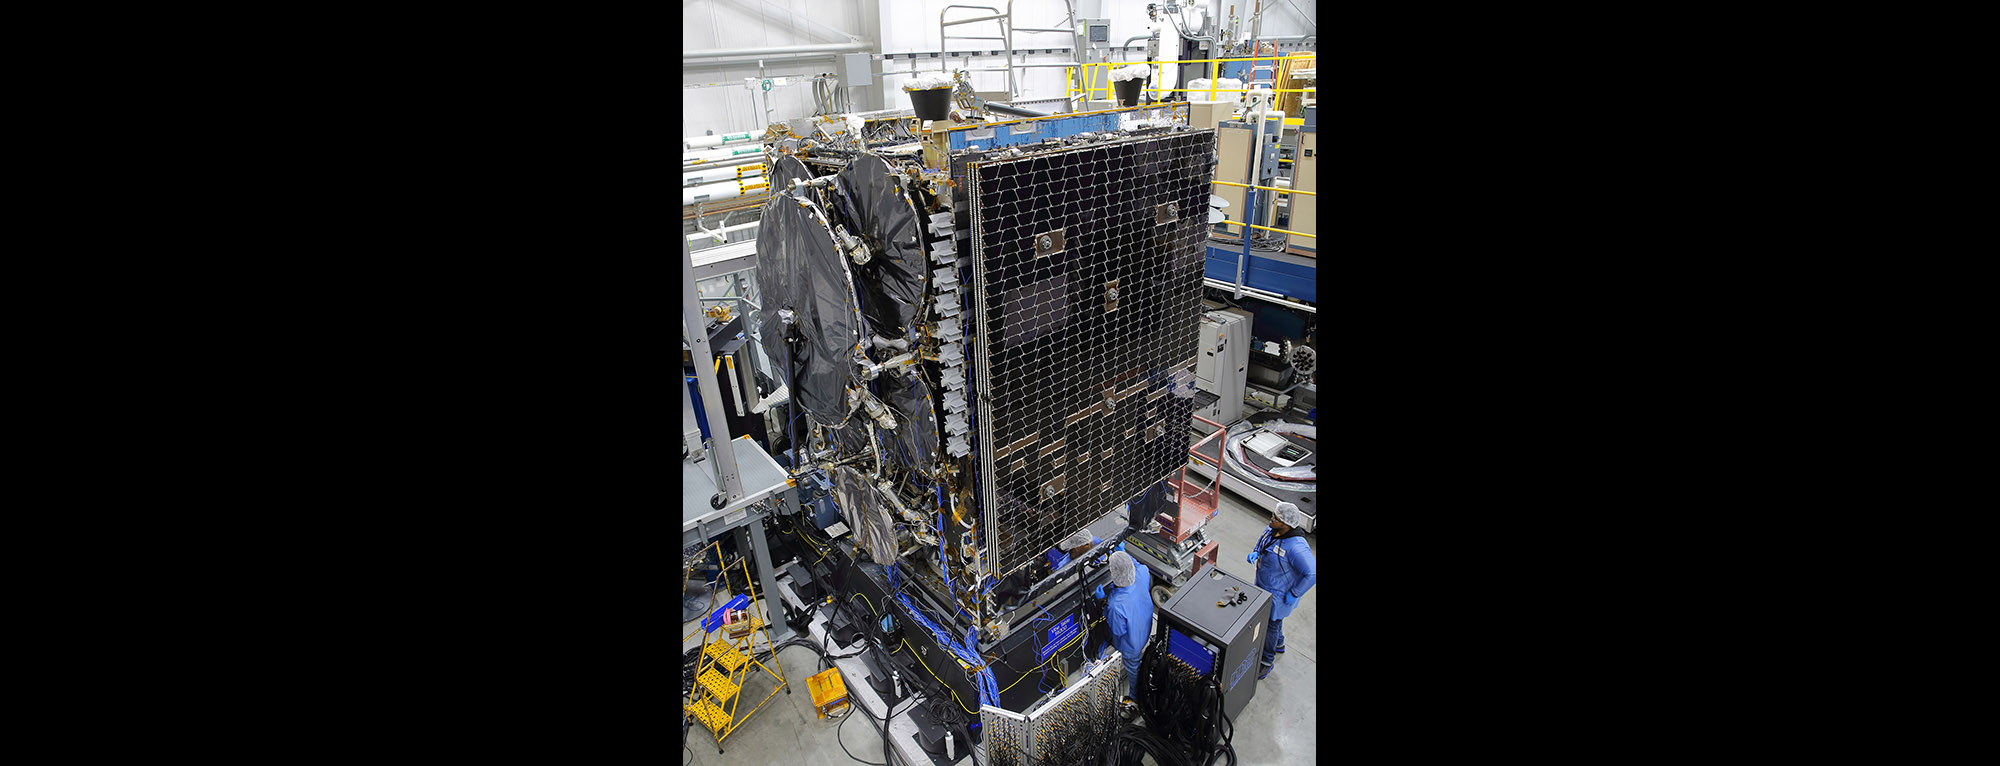 satellite being worked by technicians.